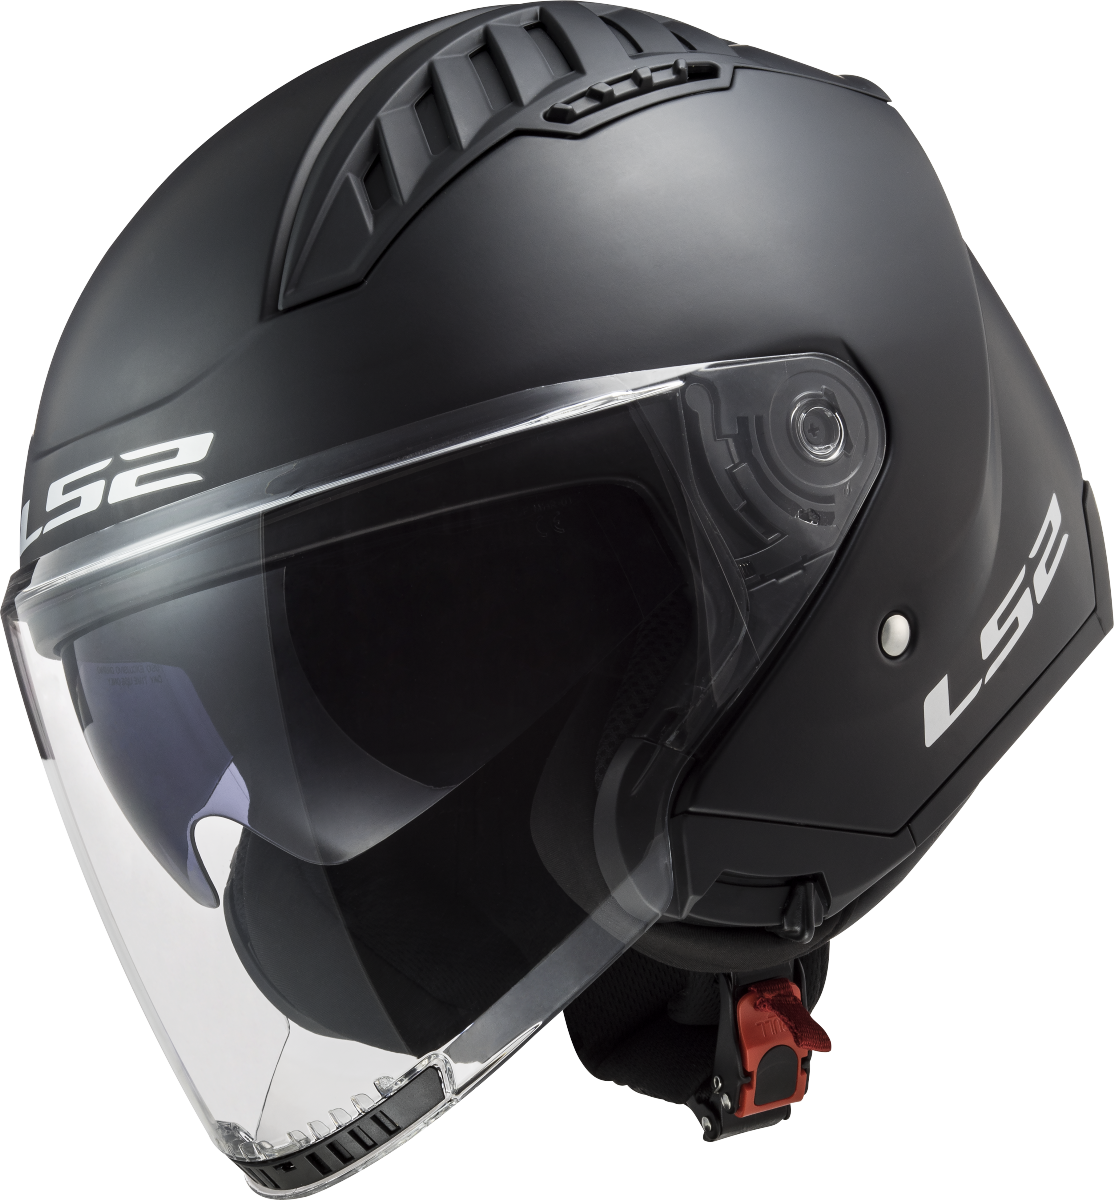 Casco LS2 OF600 COPTER SOLID NEGRO MATE 5